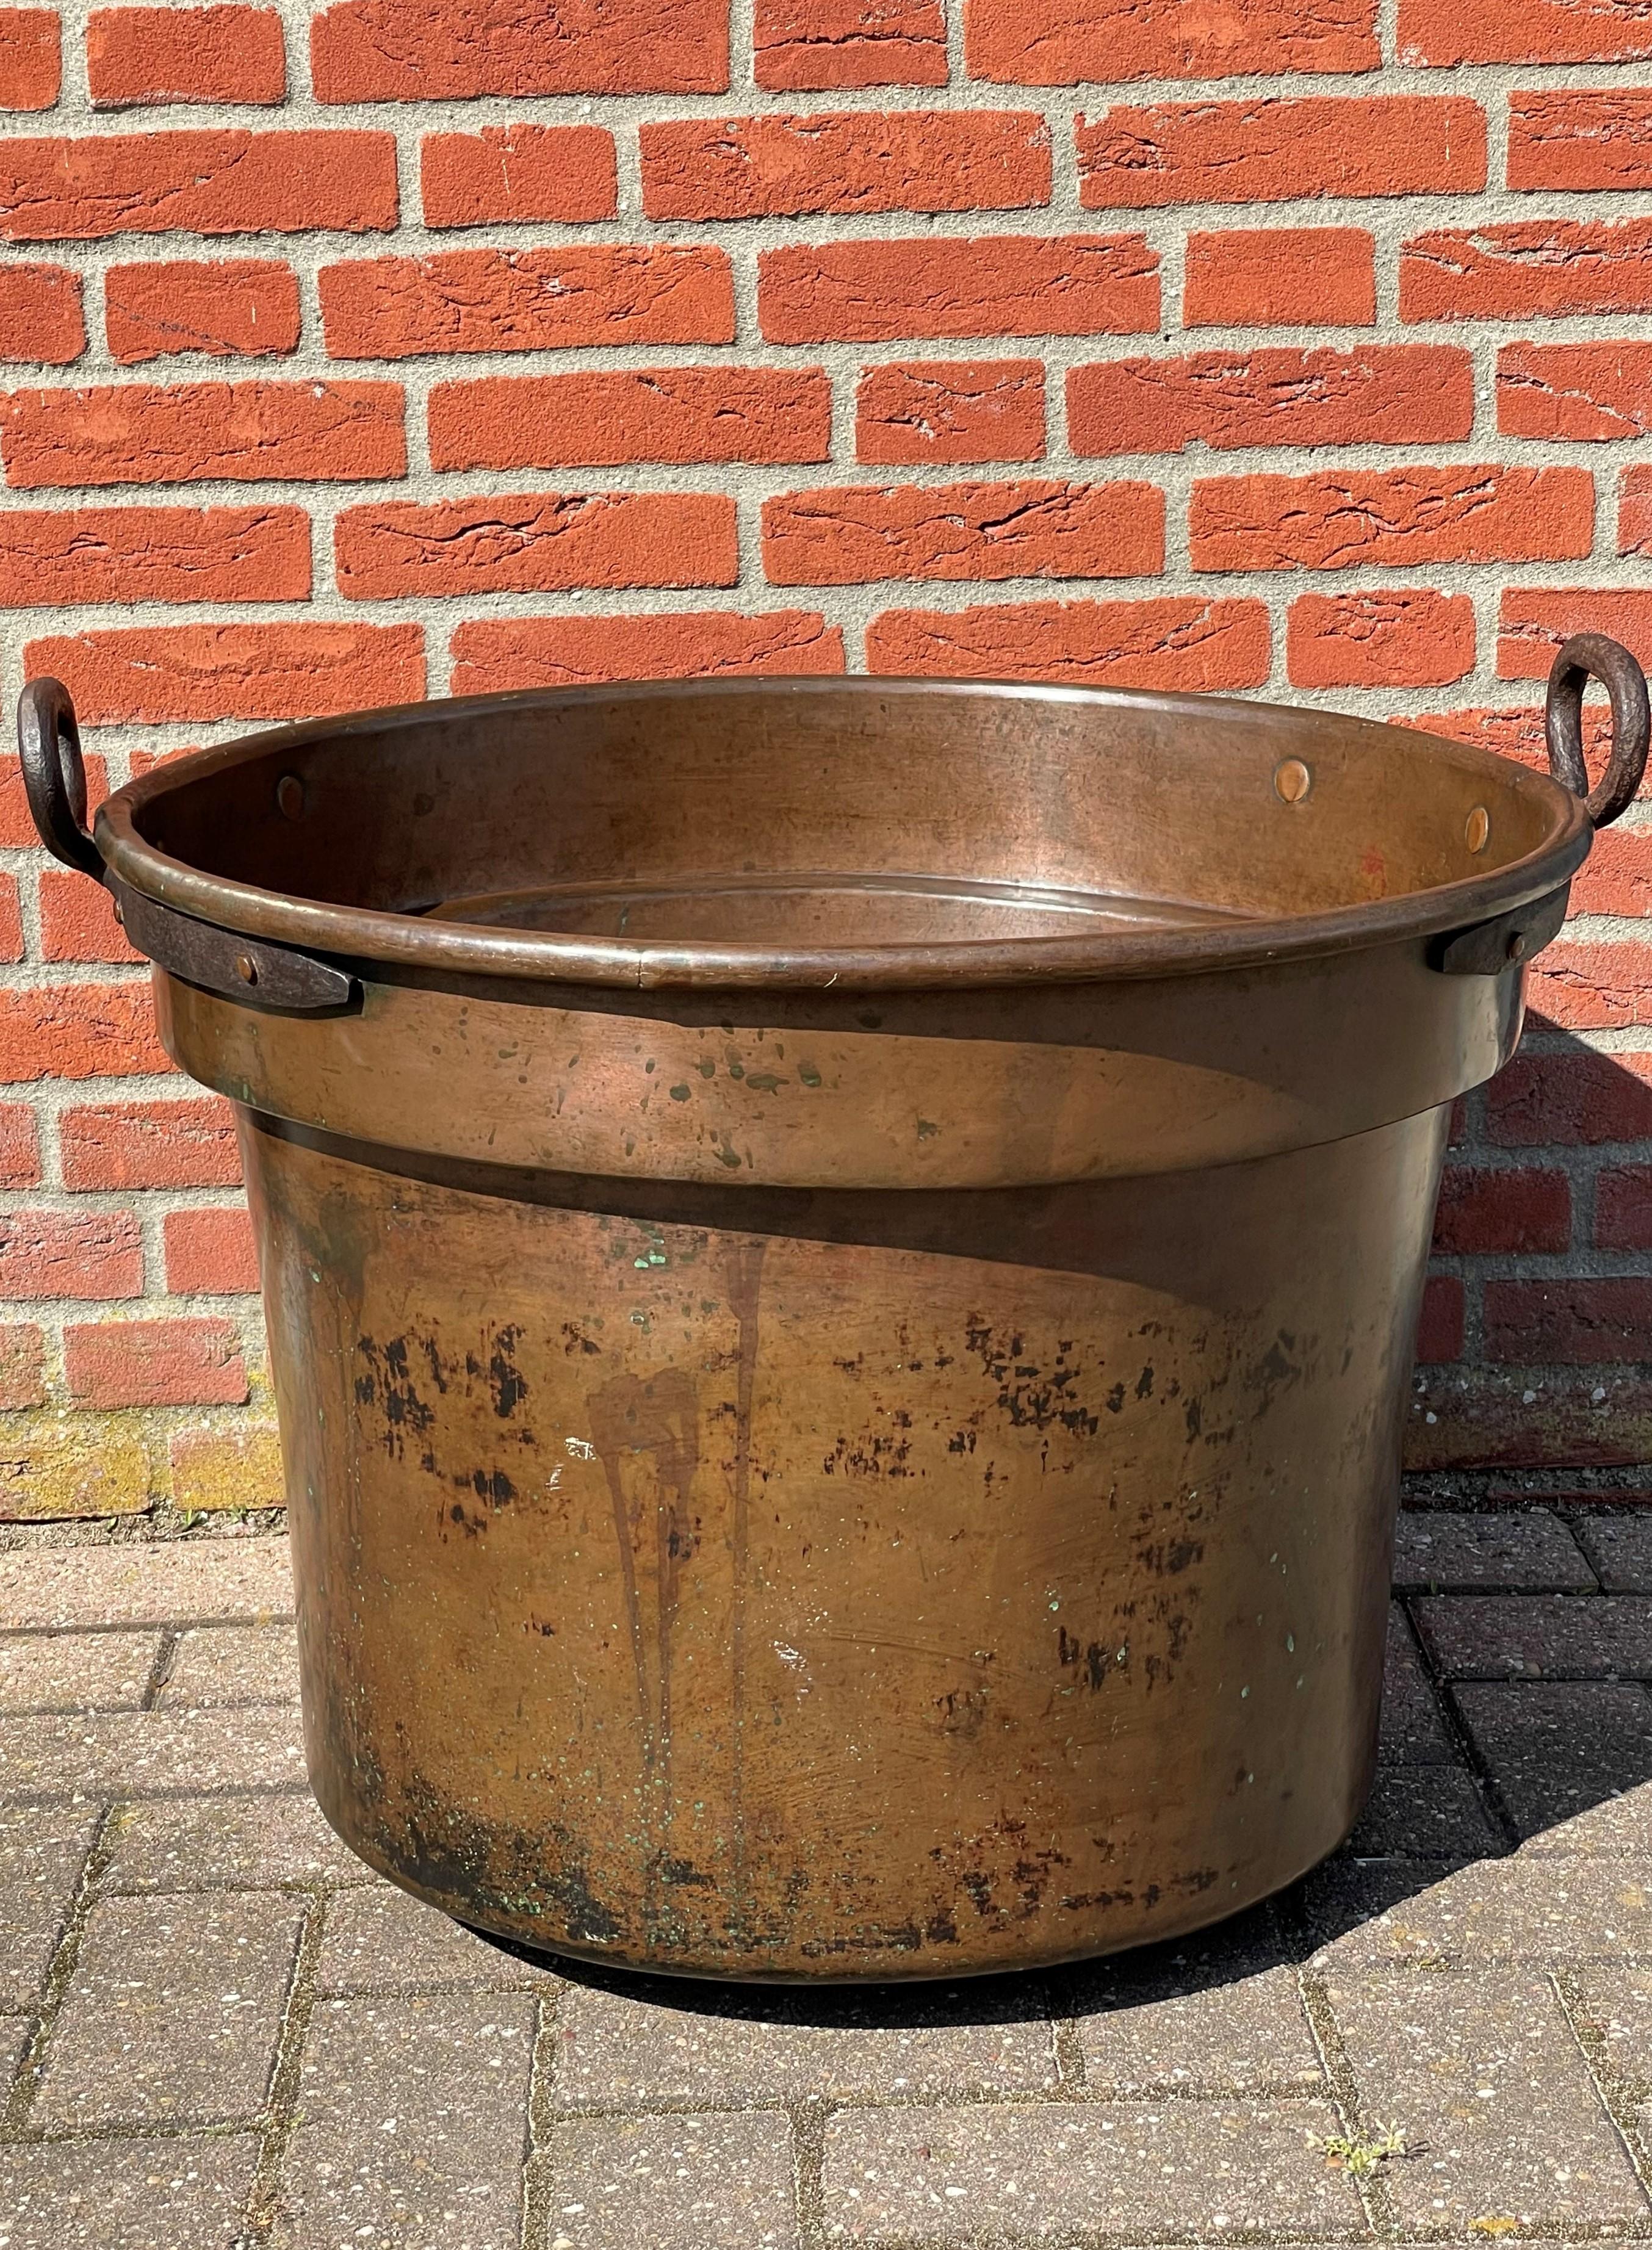 Largest Antique & Handcrafted Copper and Forged Iron Firewood Bucket or Planter 10